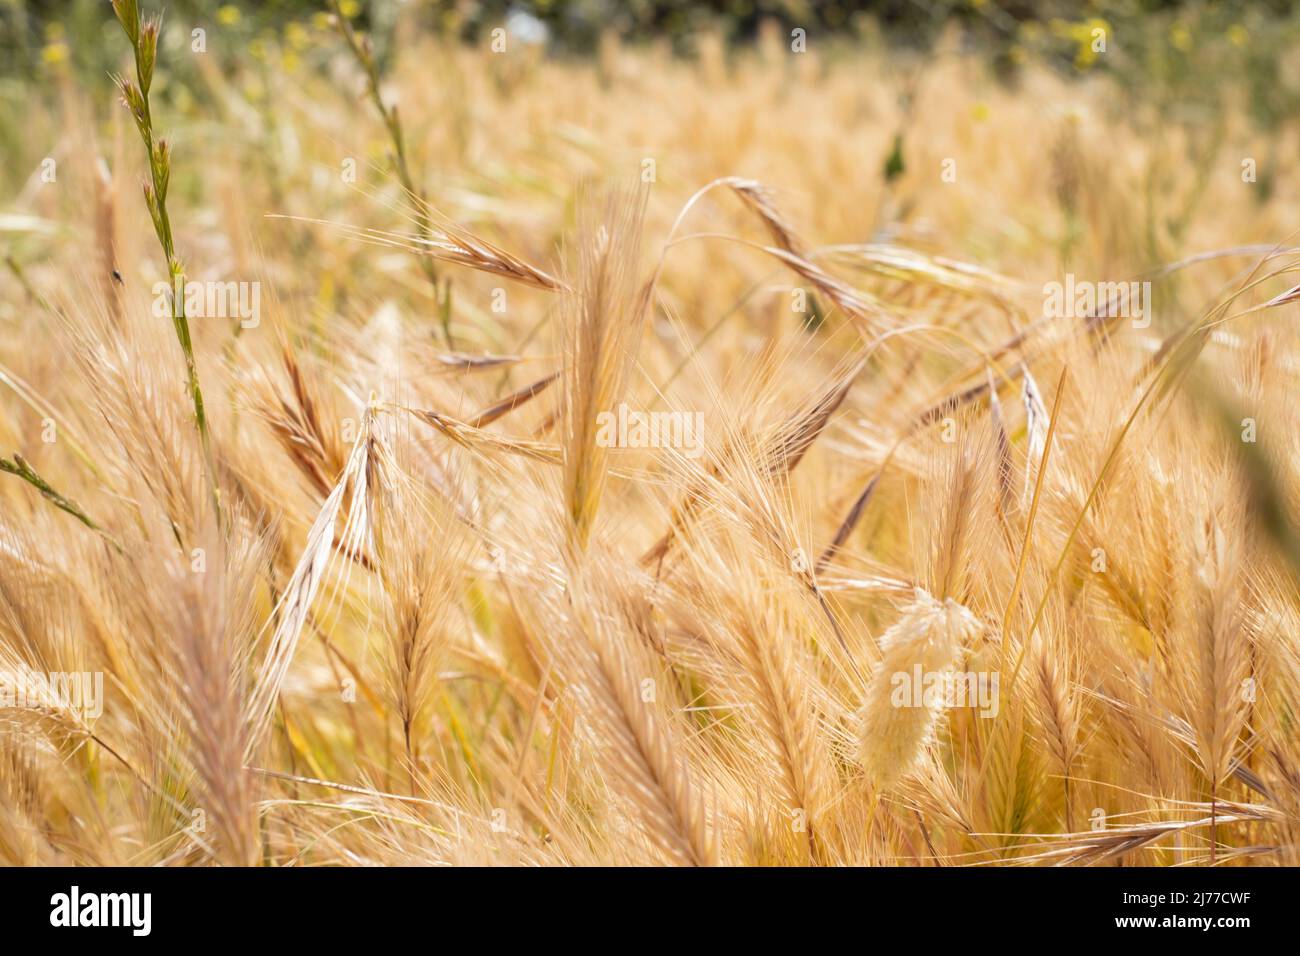 golden field of wild grasses, which look like wheat.Tenerife.Spain Stock Photo